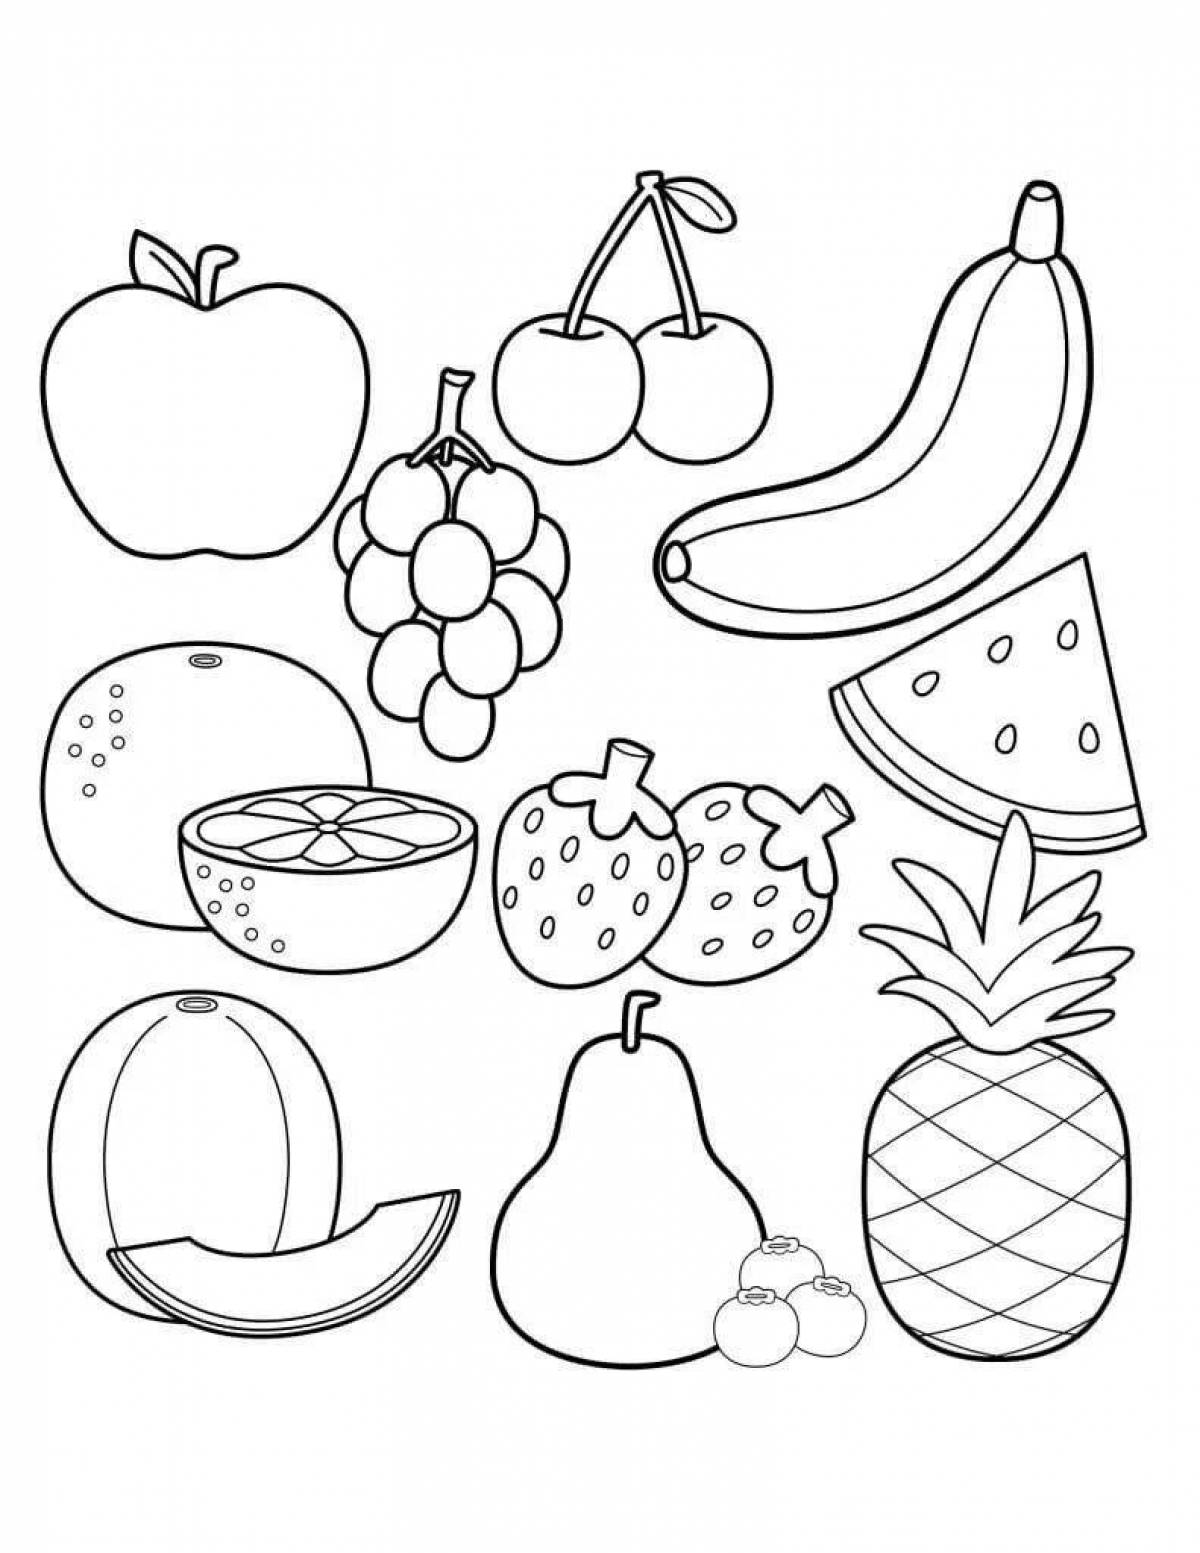 Colorful healthy food coloring book for 4-5 year olds